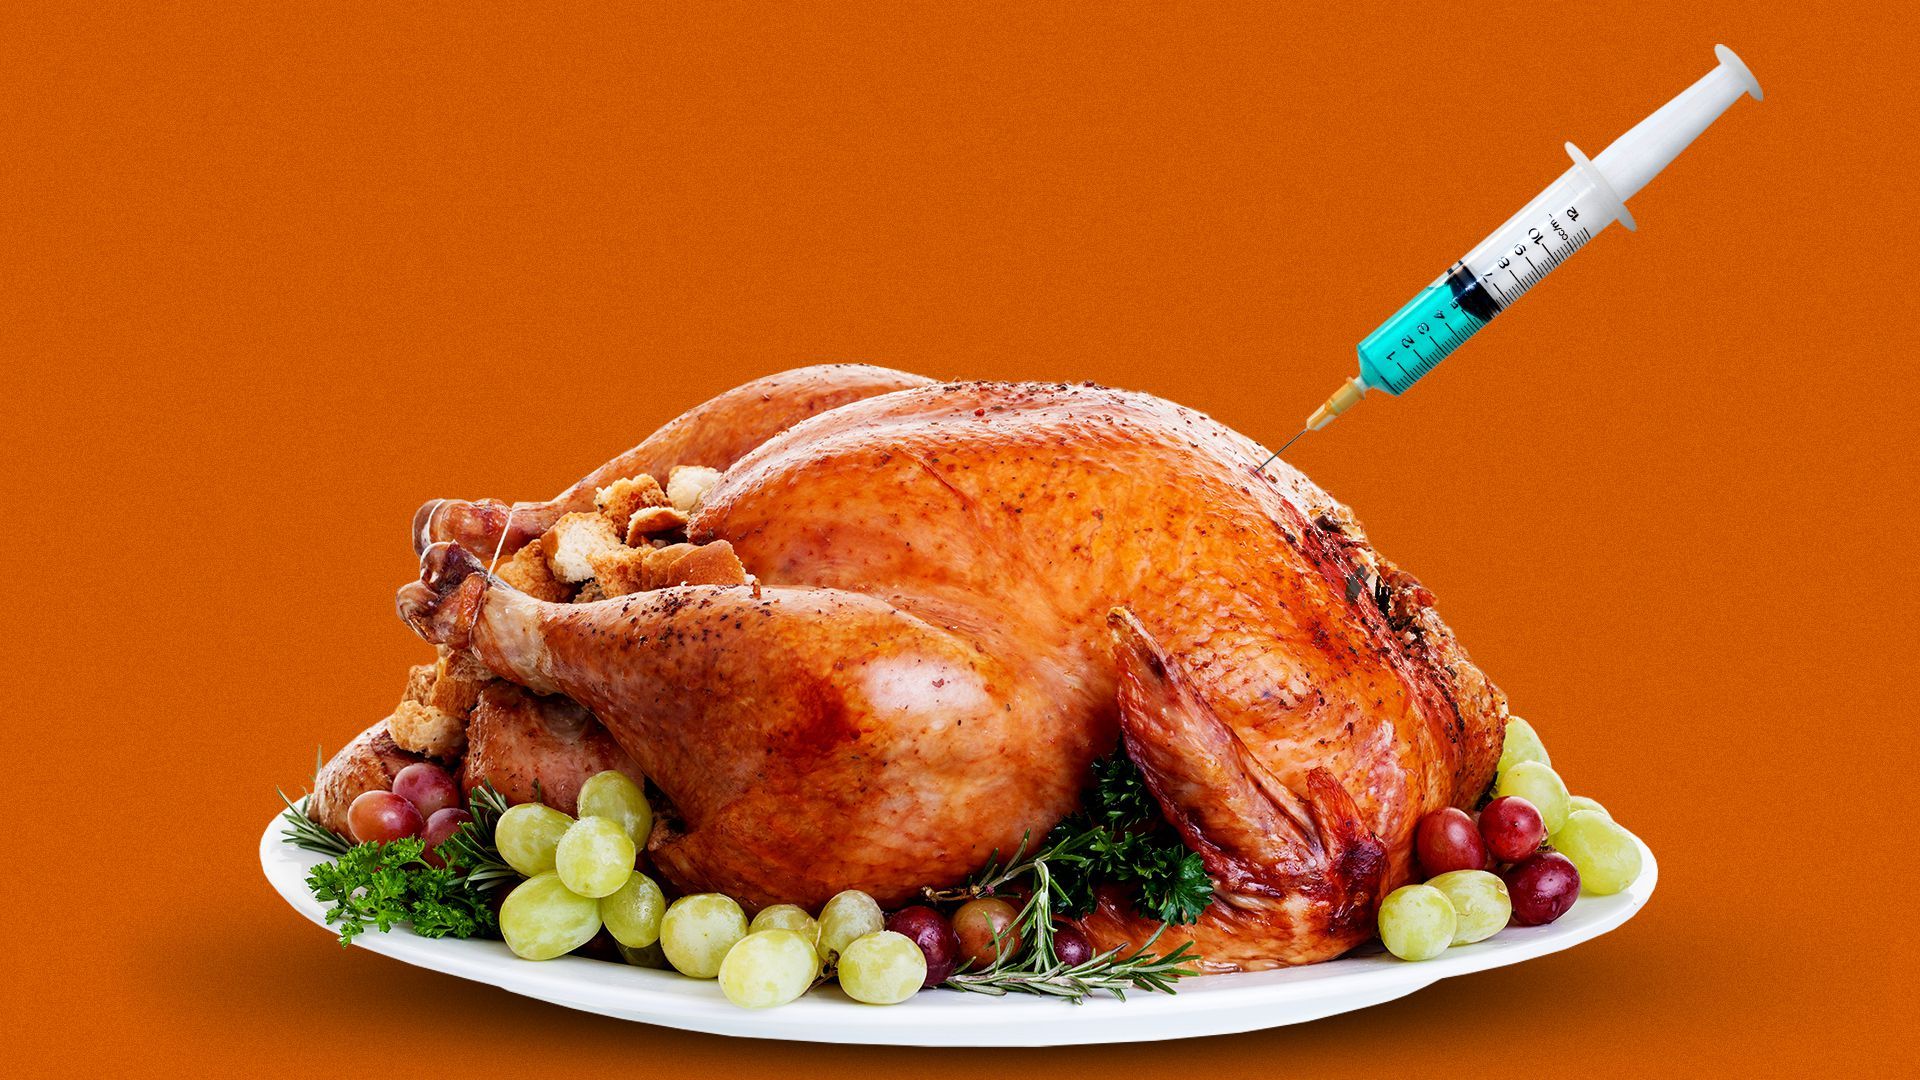 Illustration of a vaccine syringe poking into a cooked Thanksgiving Day turkey